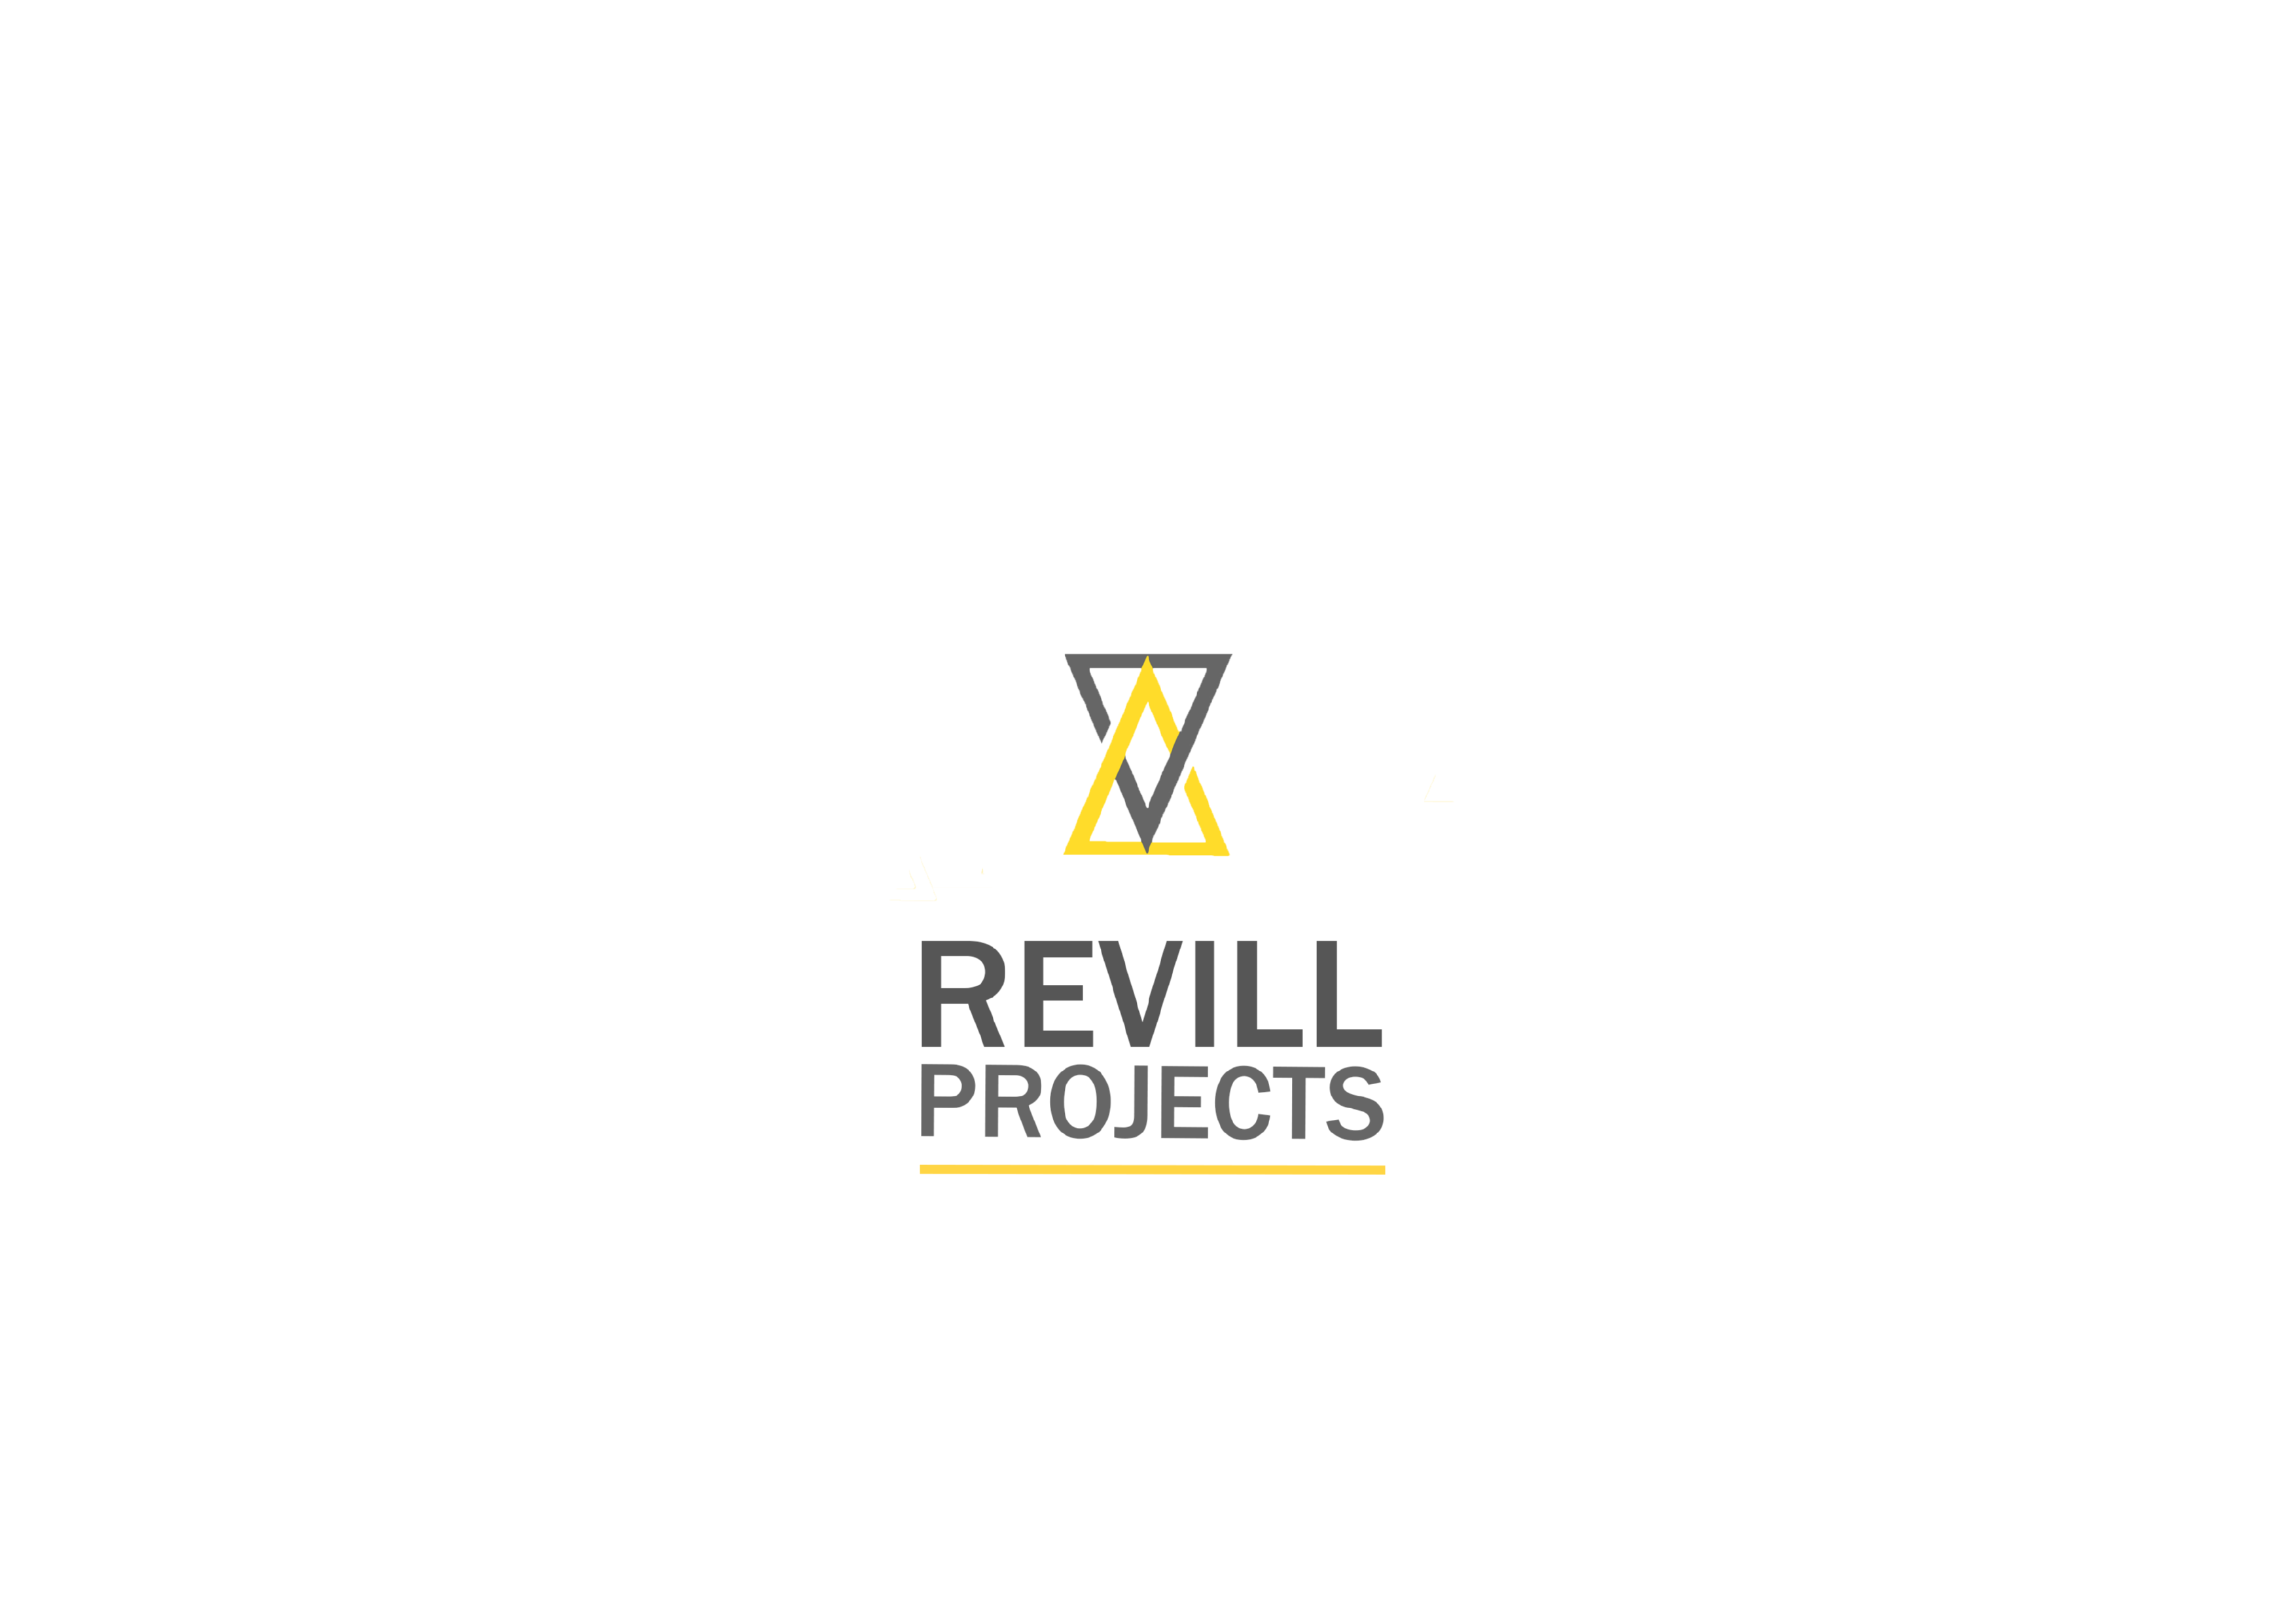 Logo of Revill Projects